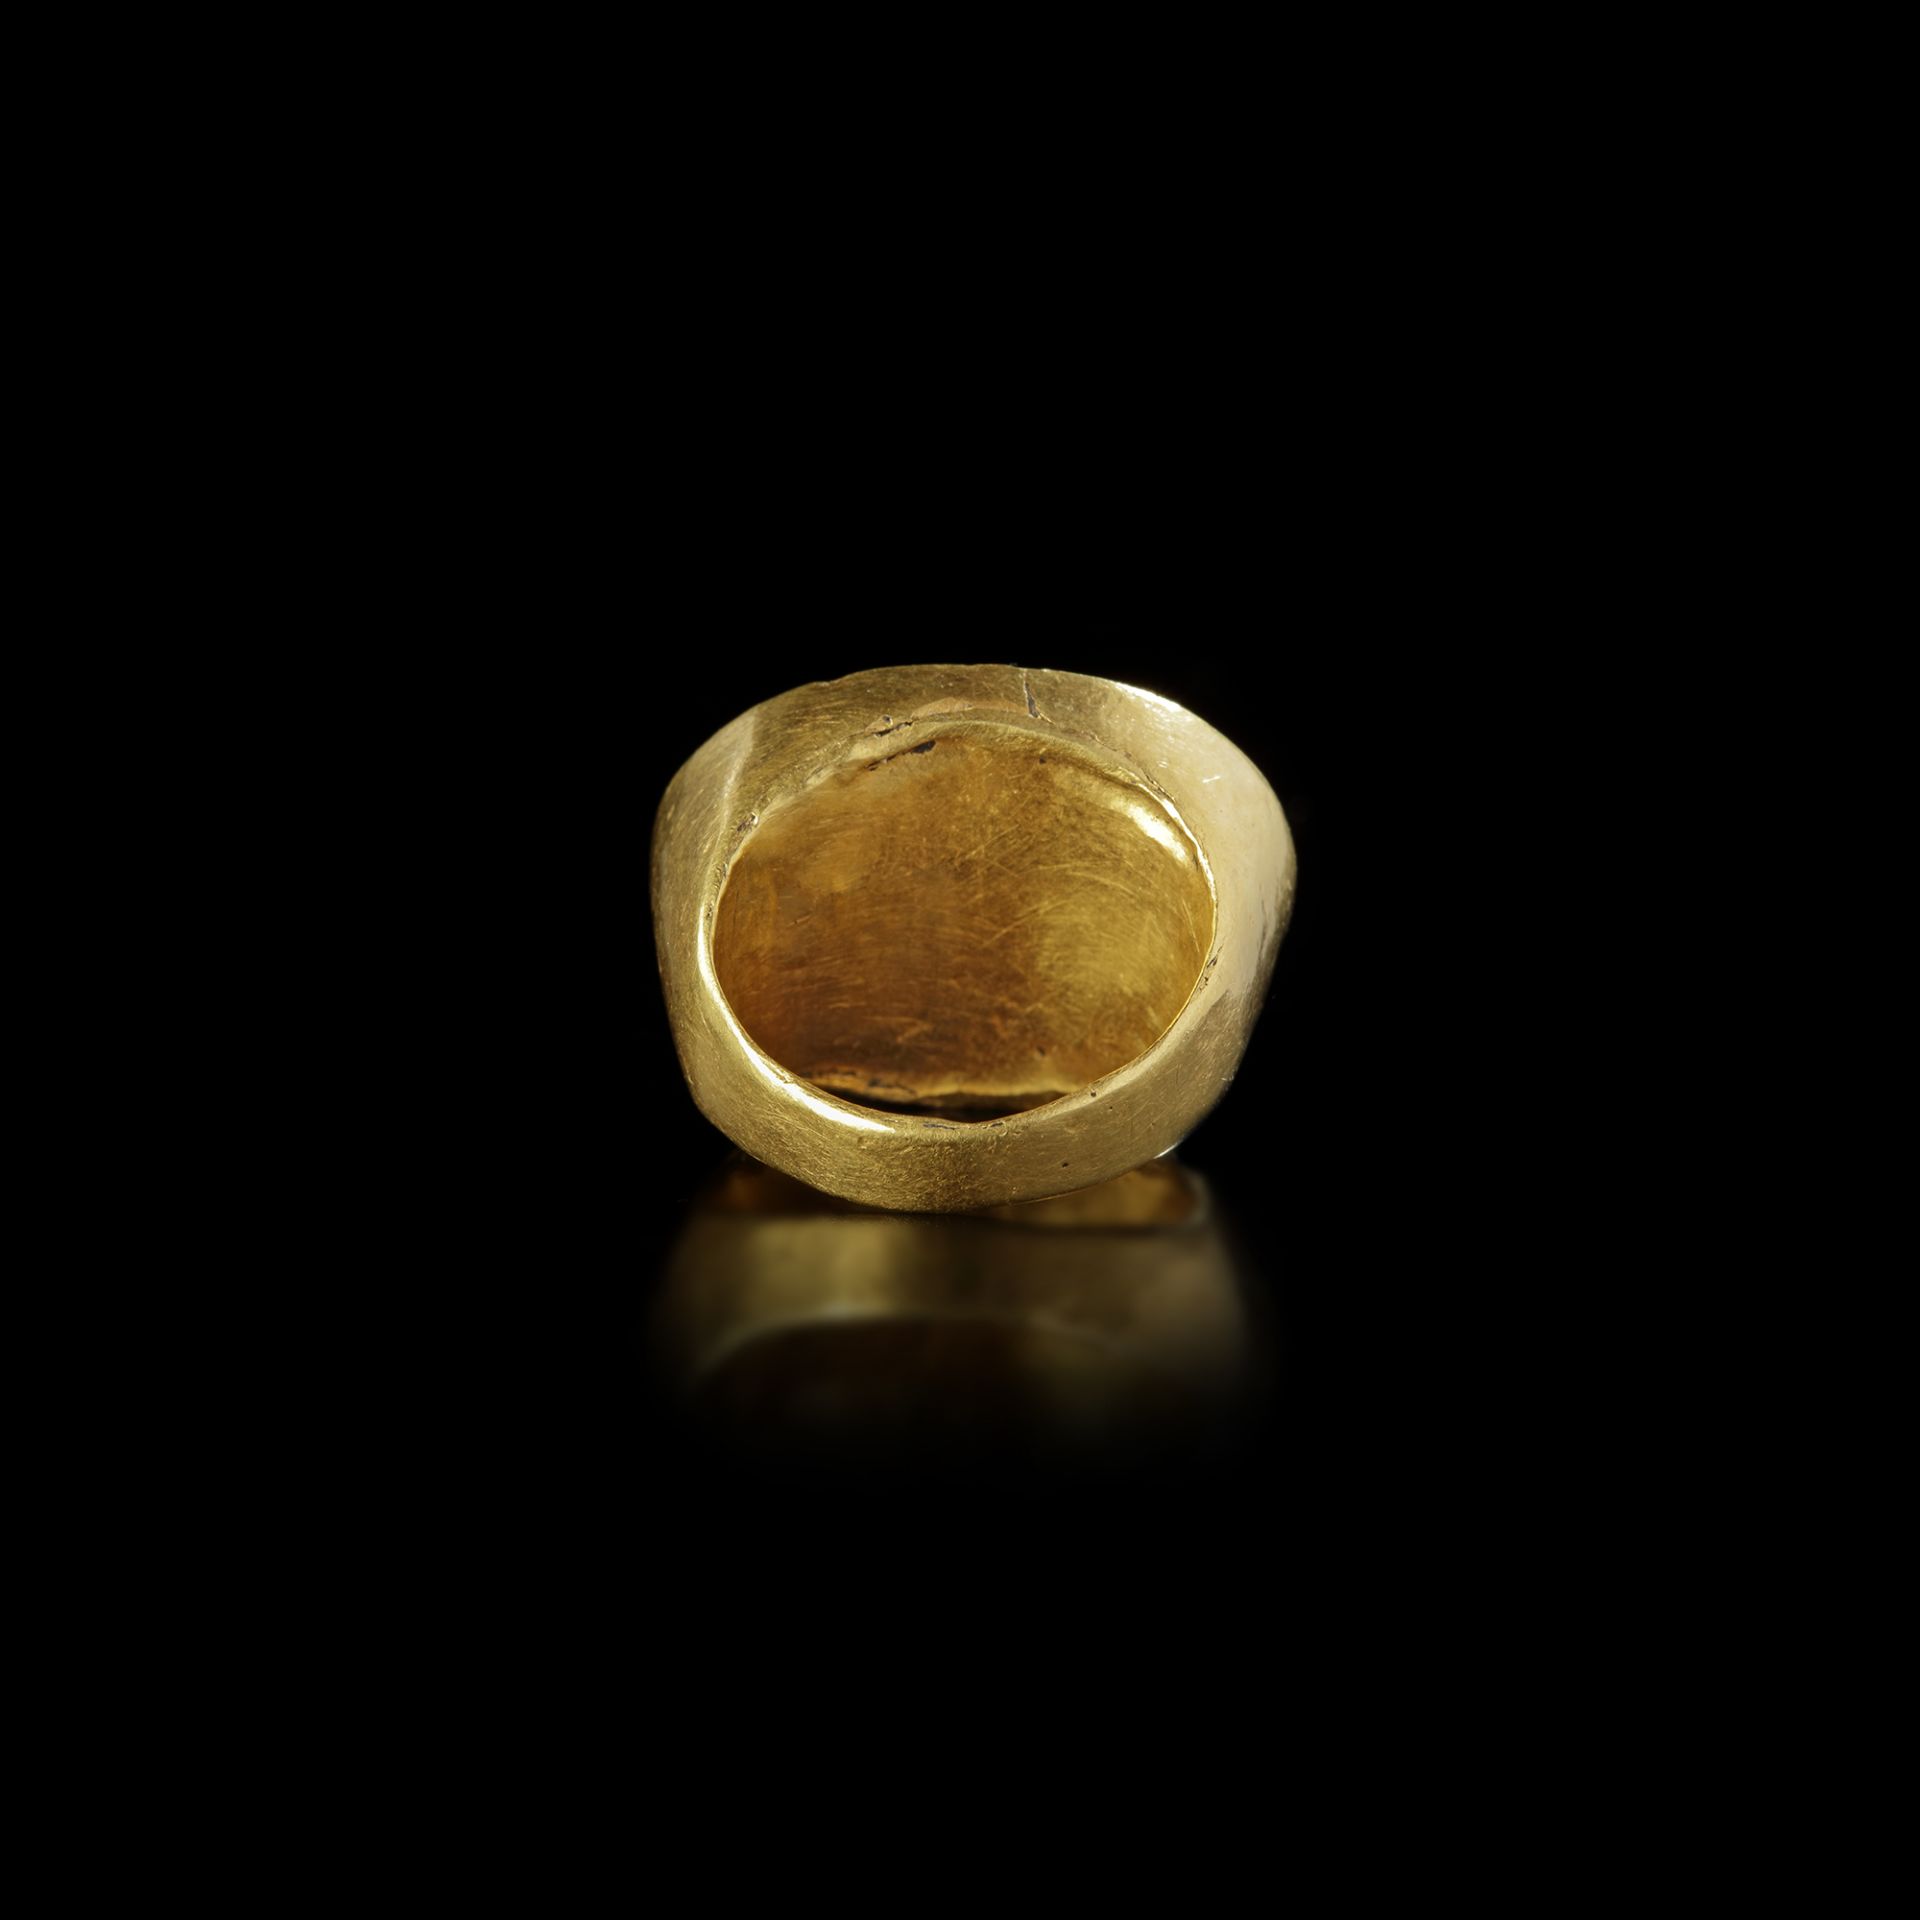 A HELLENISTIC GOLD RING WITH AN INTAGLIO SHOWING A LOCUST, 2ND-3RD CENTURY BC - Image 2 of 4